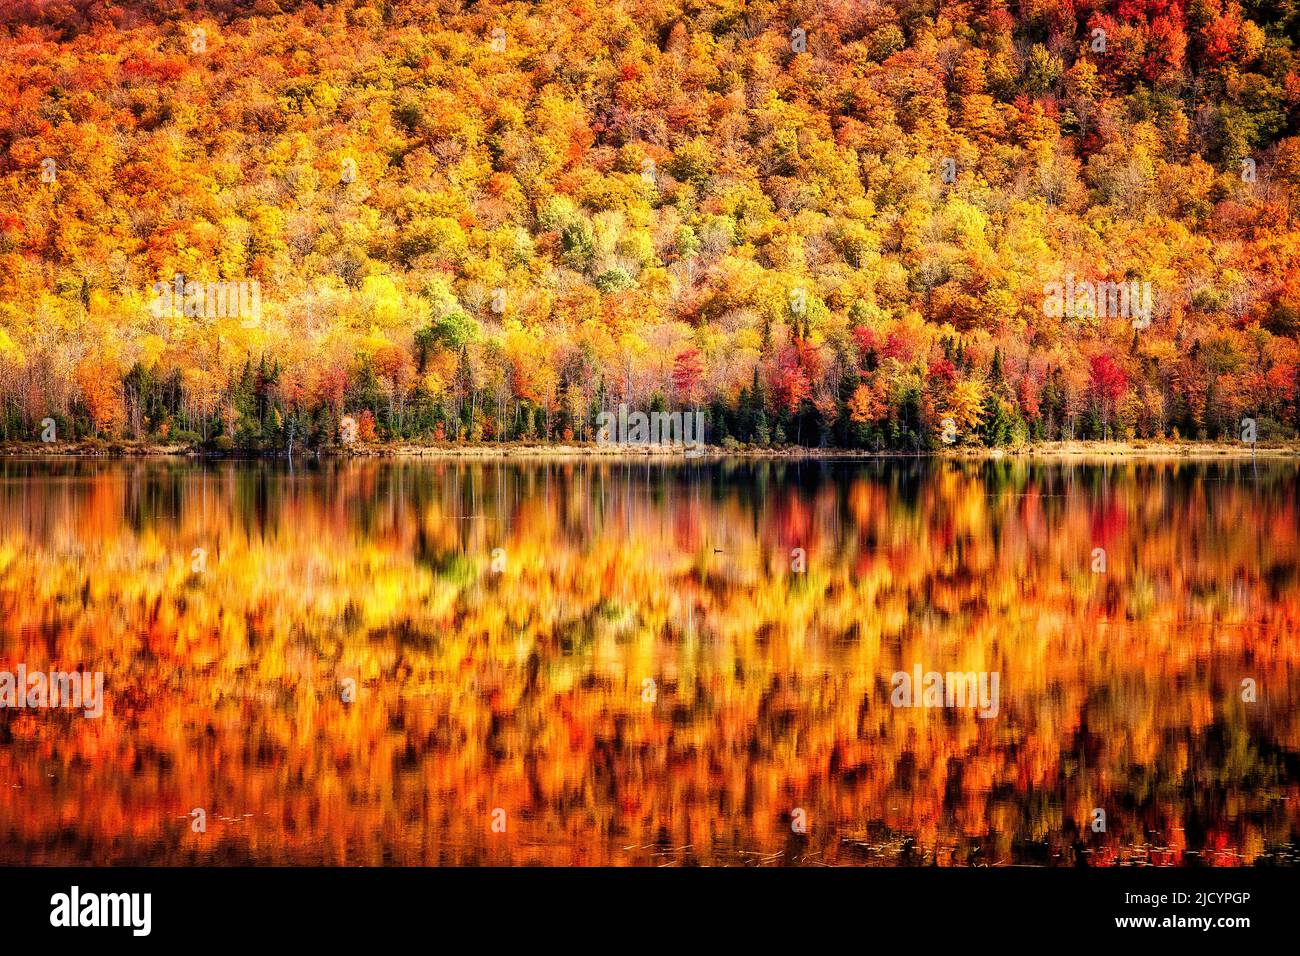 Spectacular fall color reflects in the still waters of Long Pond near Belvidere Corners, Vermont. Stock Photo